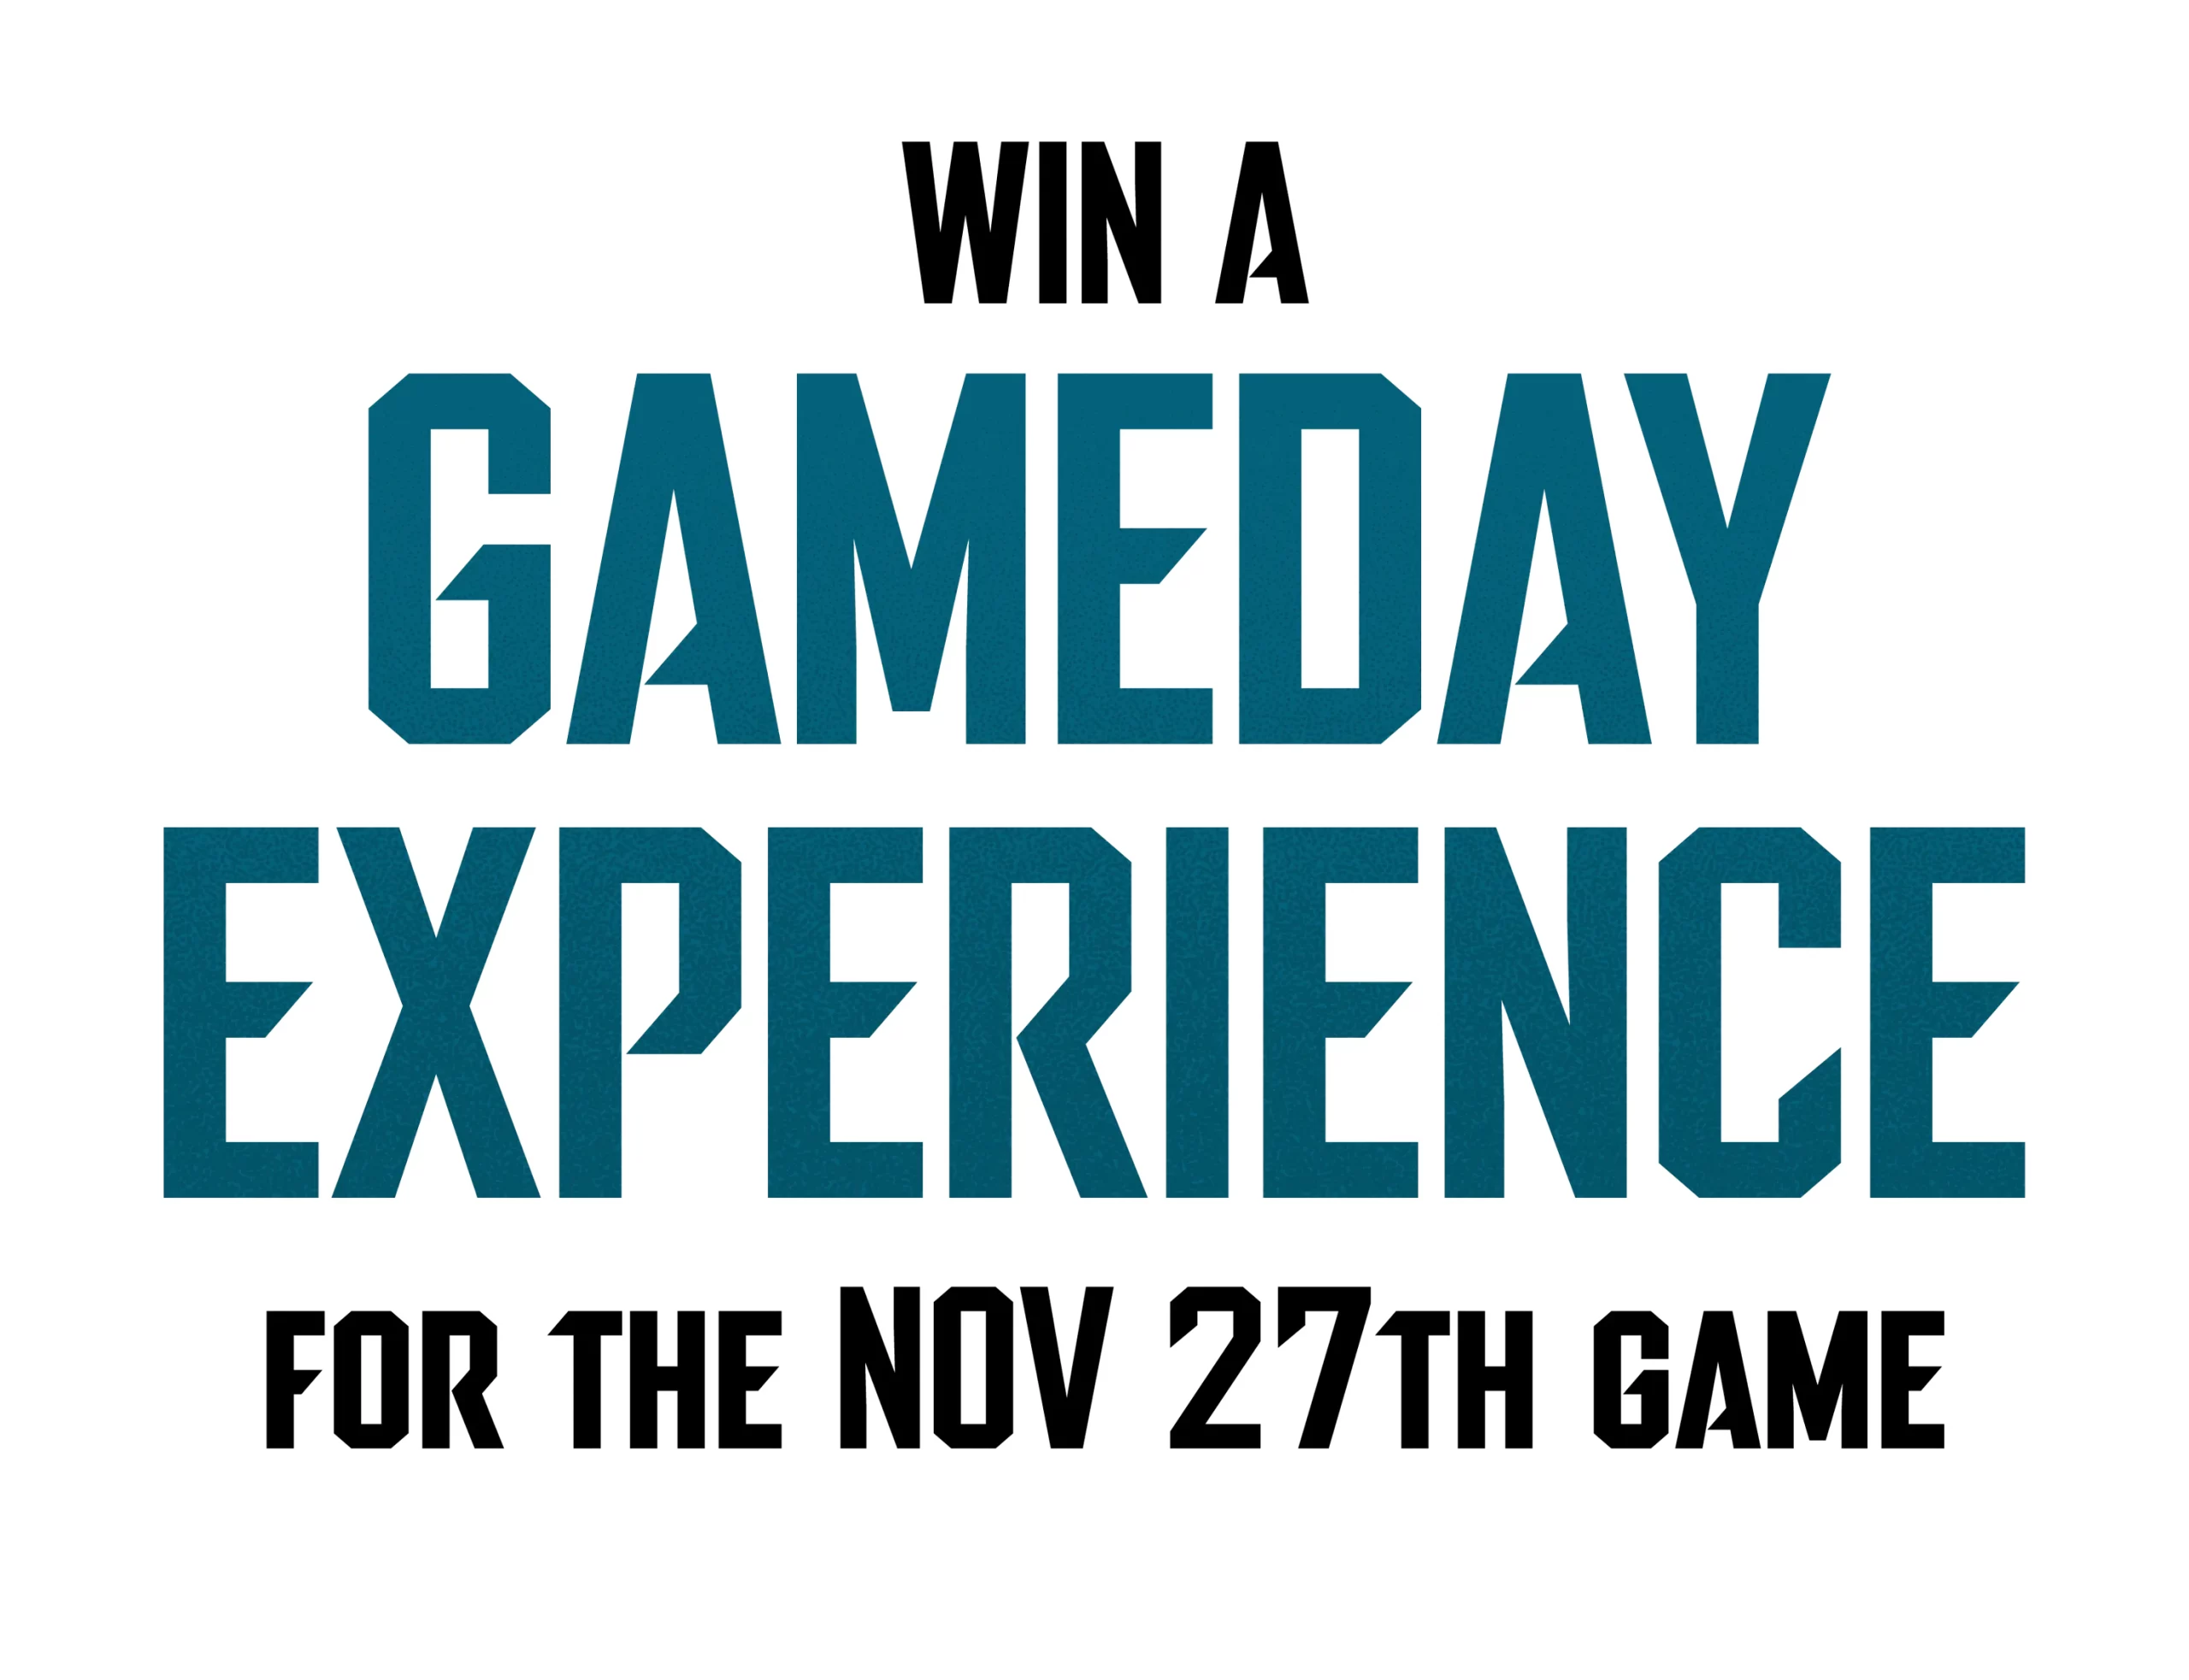 Win a Gameday Experience for the Nov 27th Game